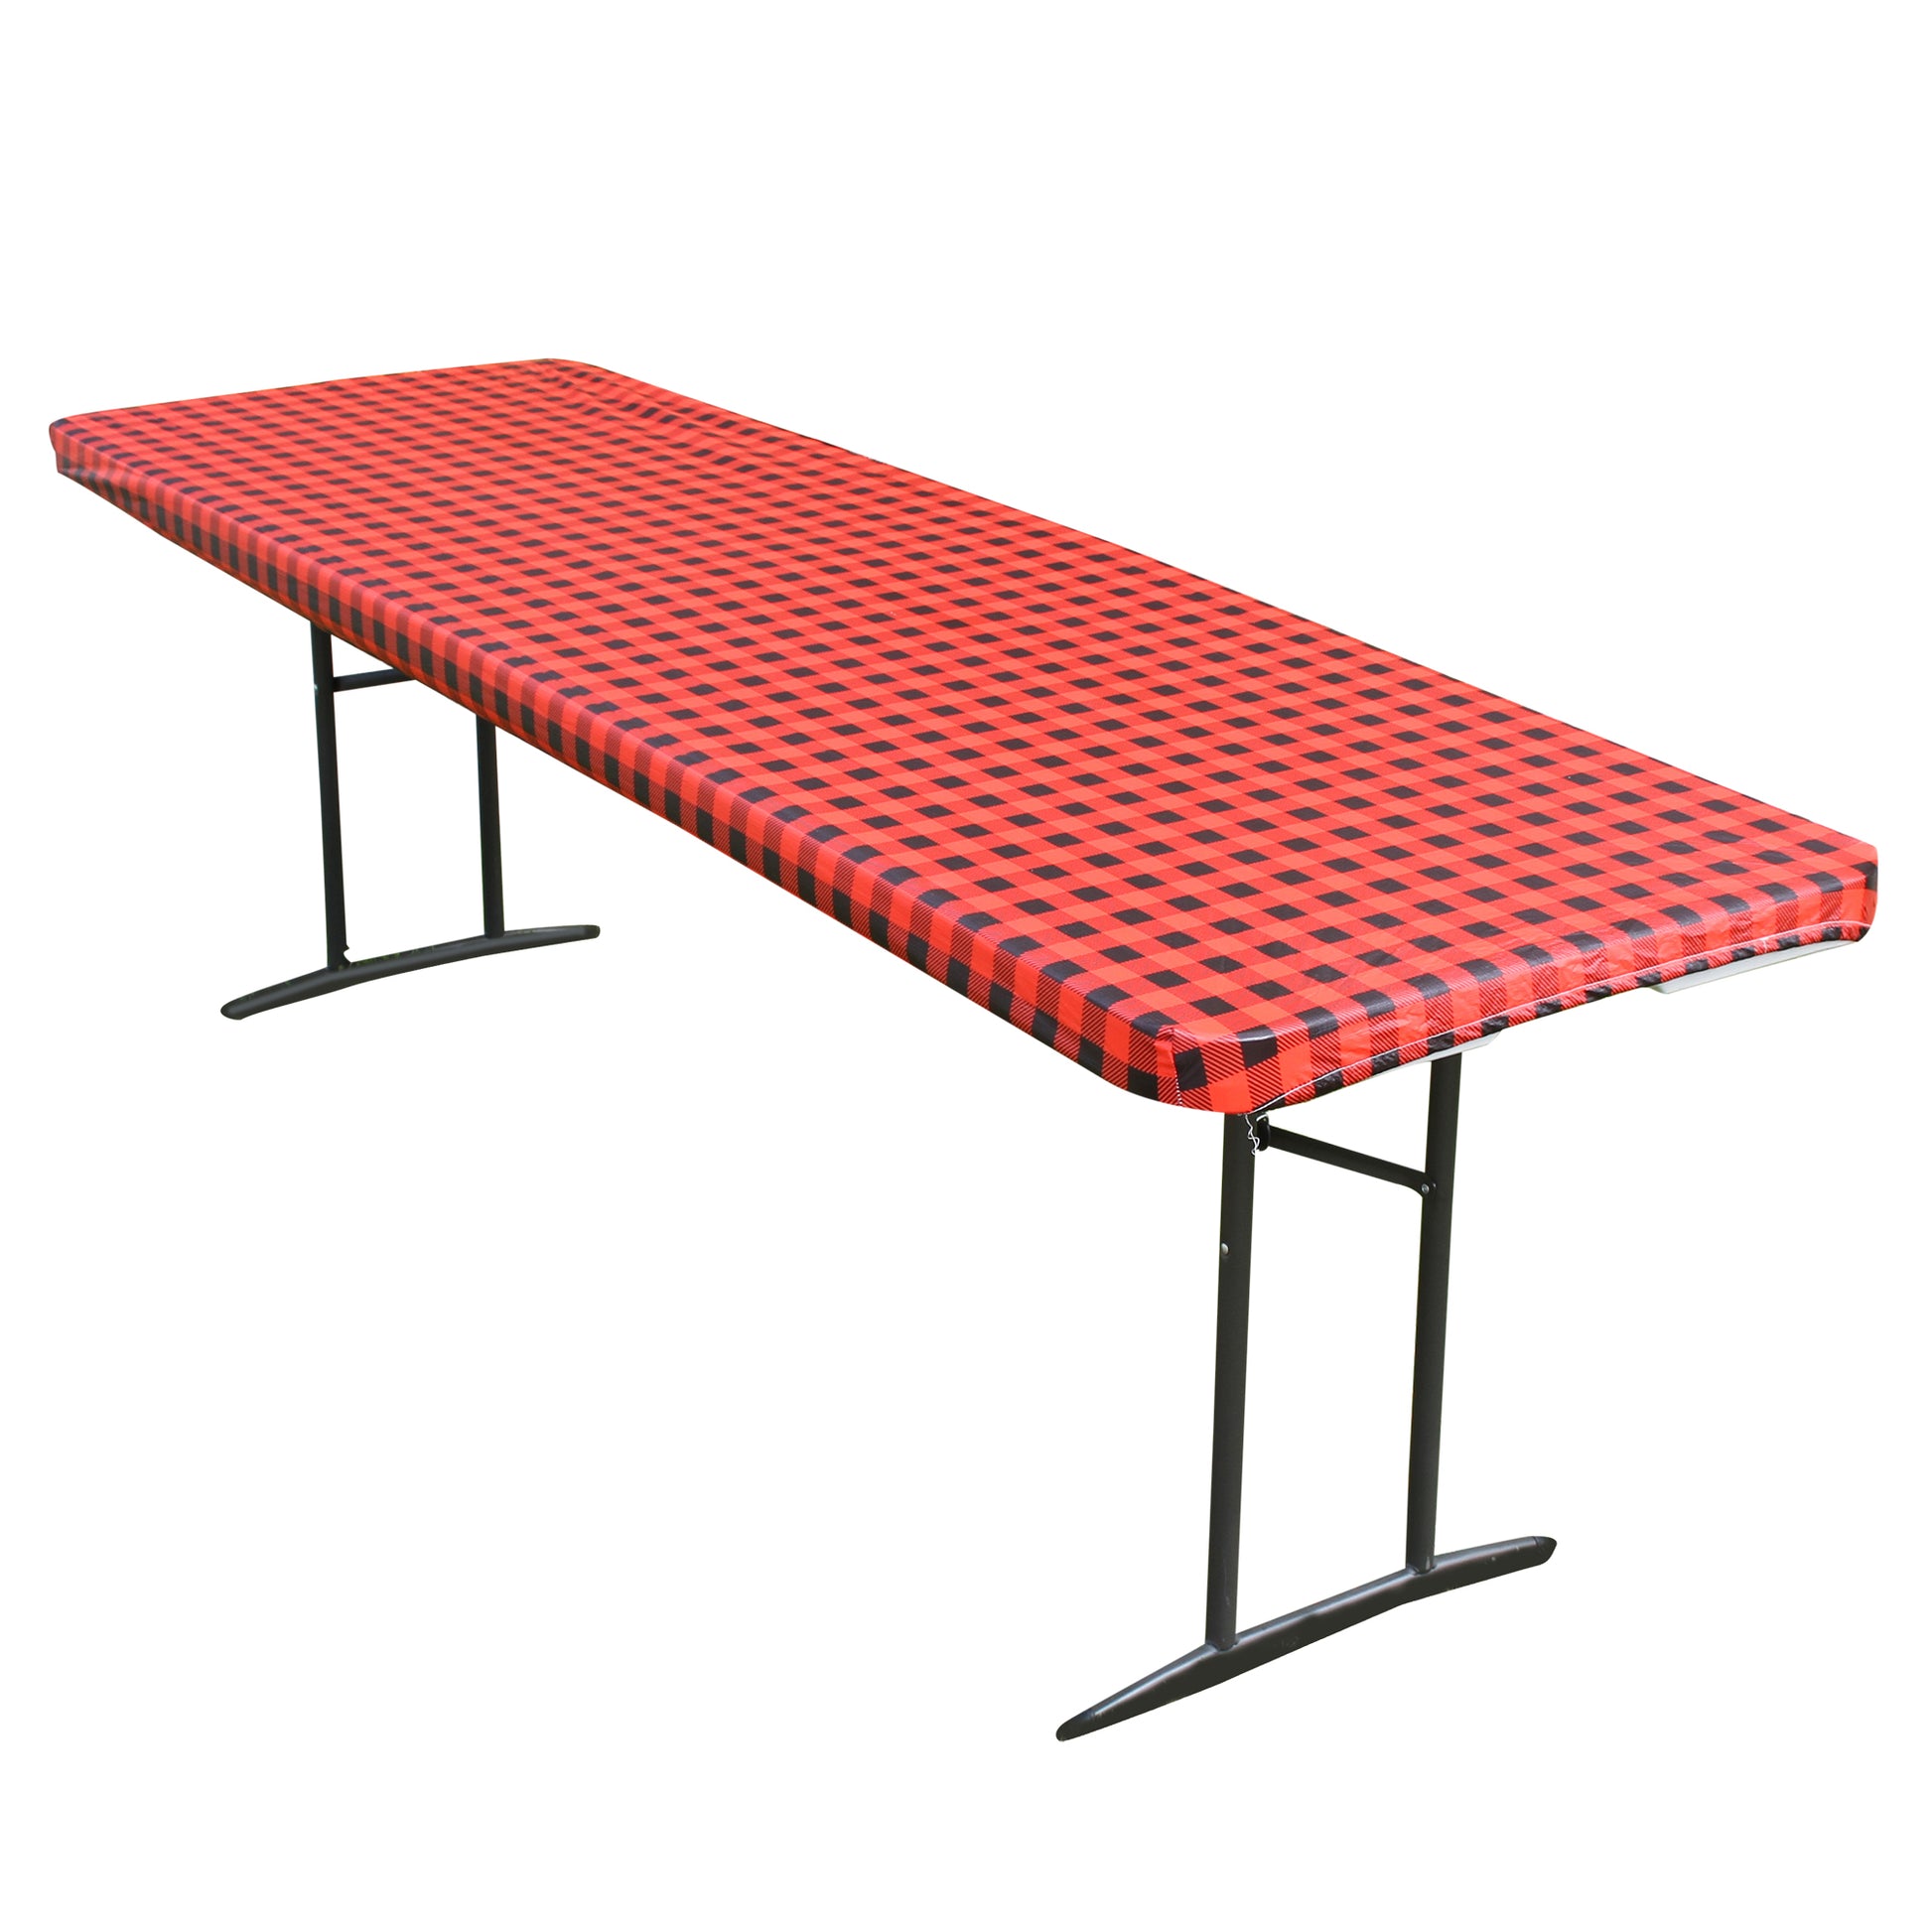 TableCloth PLUS 96" Checkerboard Black and Red Fitted PEVA Vinyl Tablecloth for 8' Folding Tables is easy to clean, water proof, easy to install, and has an elastic rim